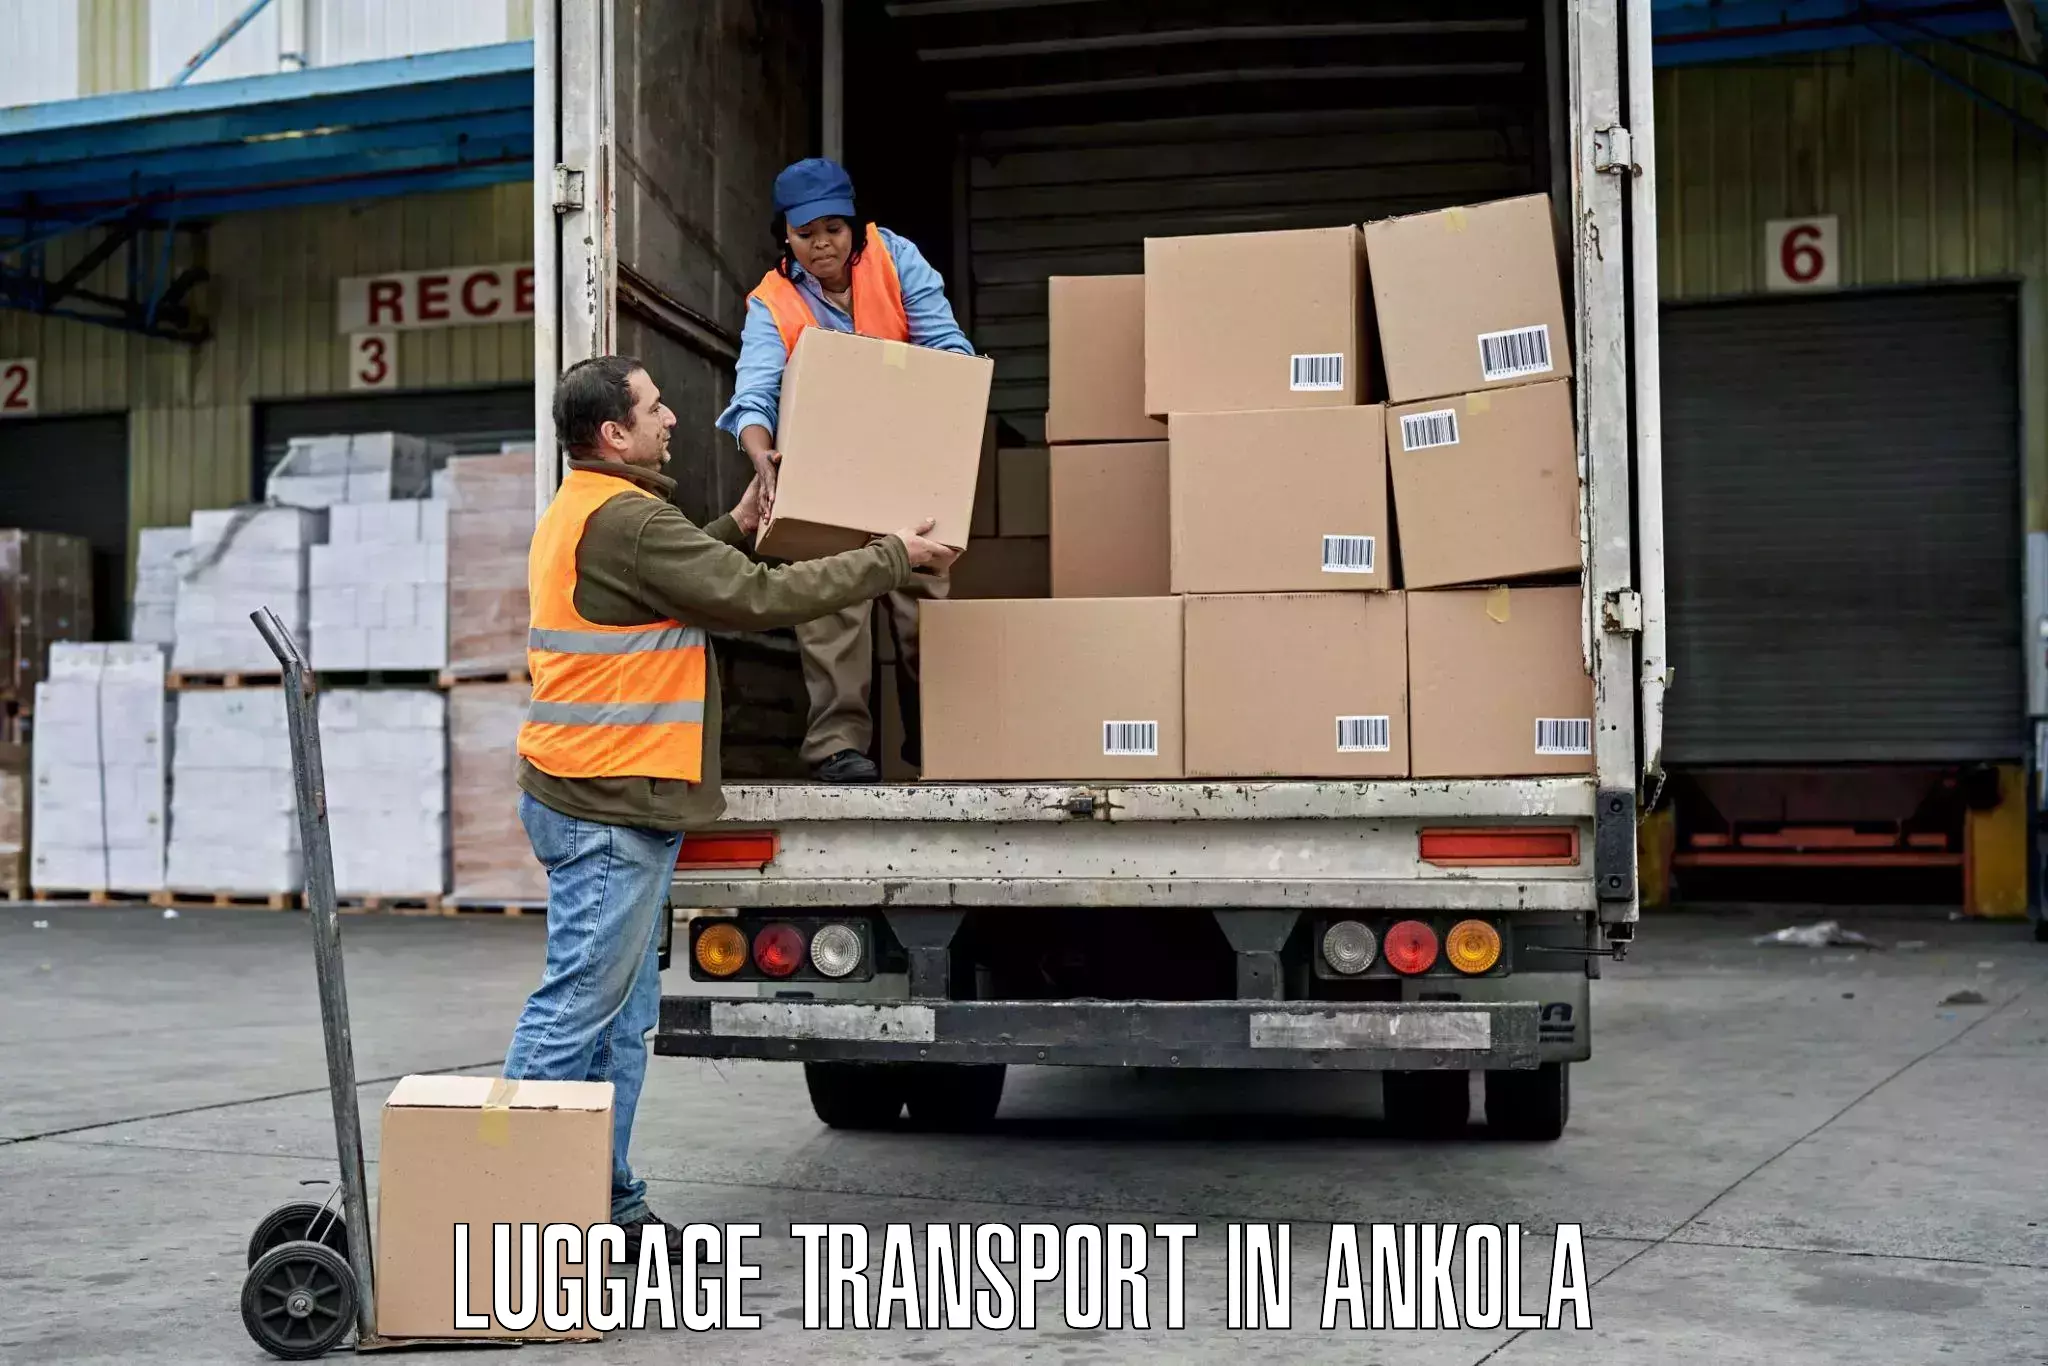 Luggage transport solutions in Ankola